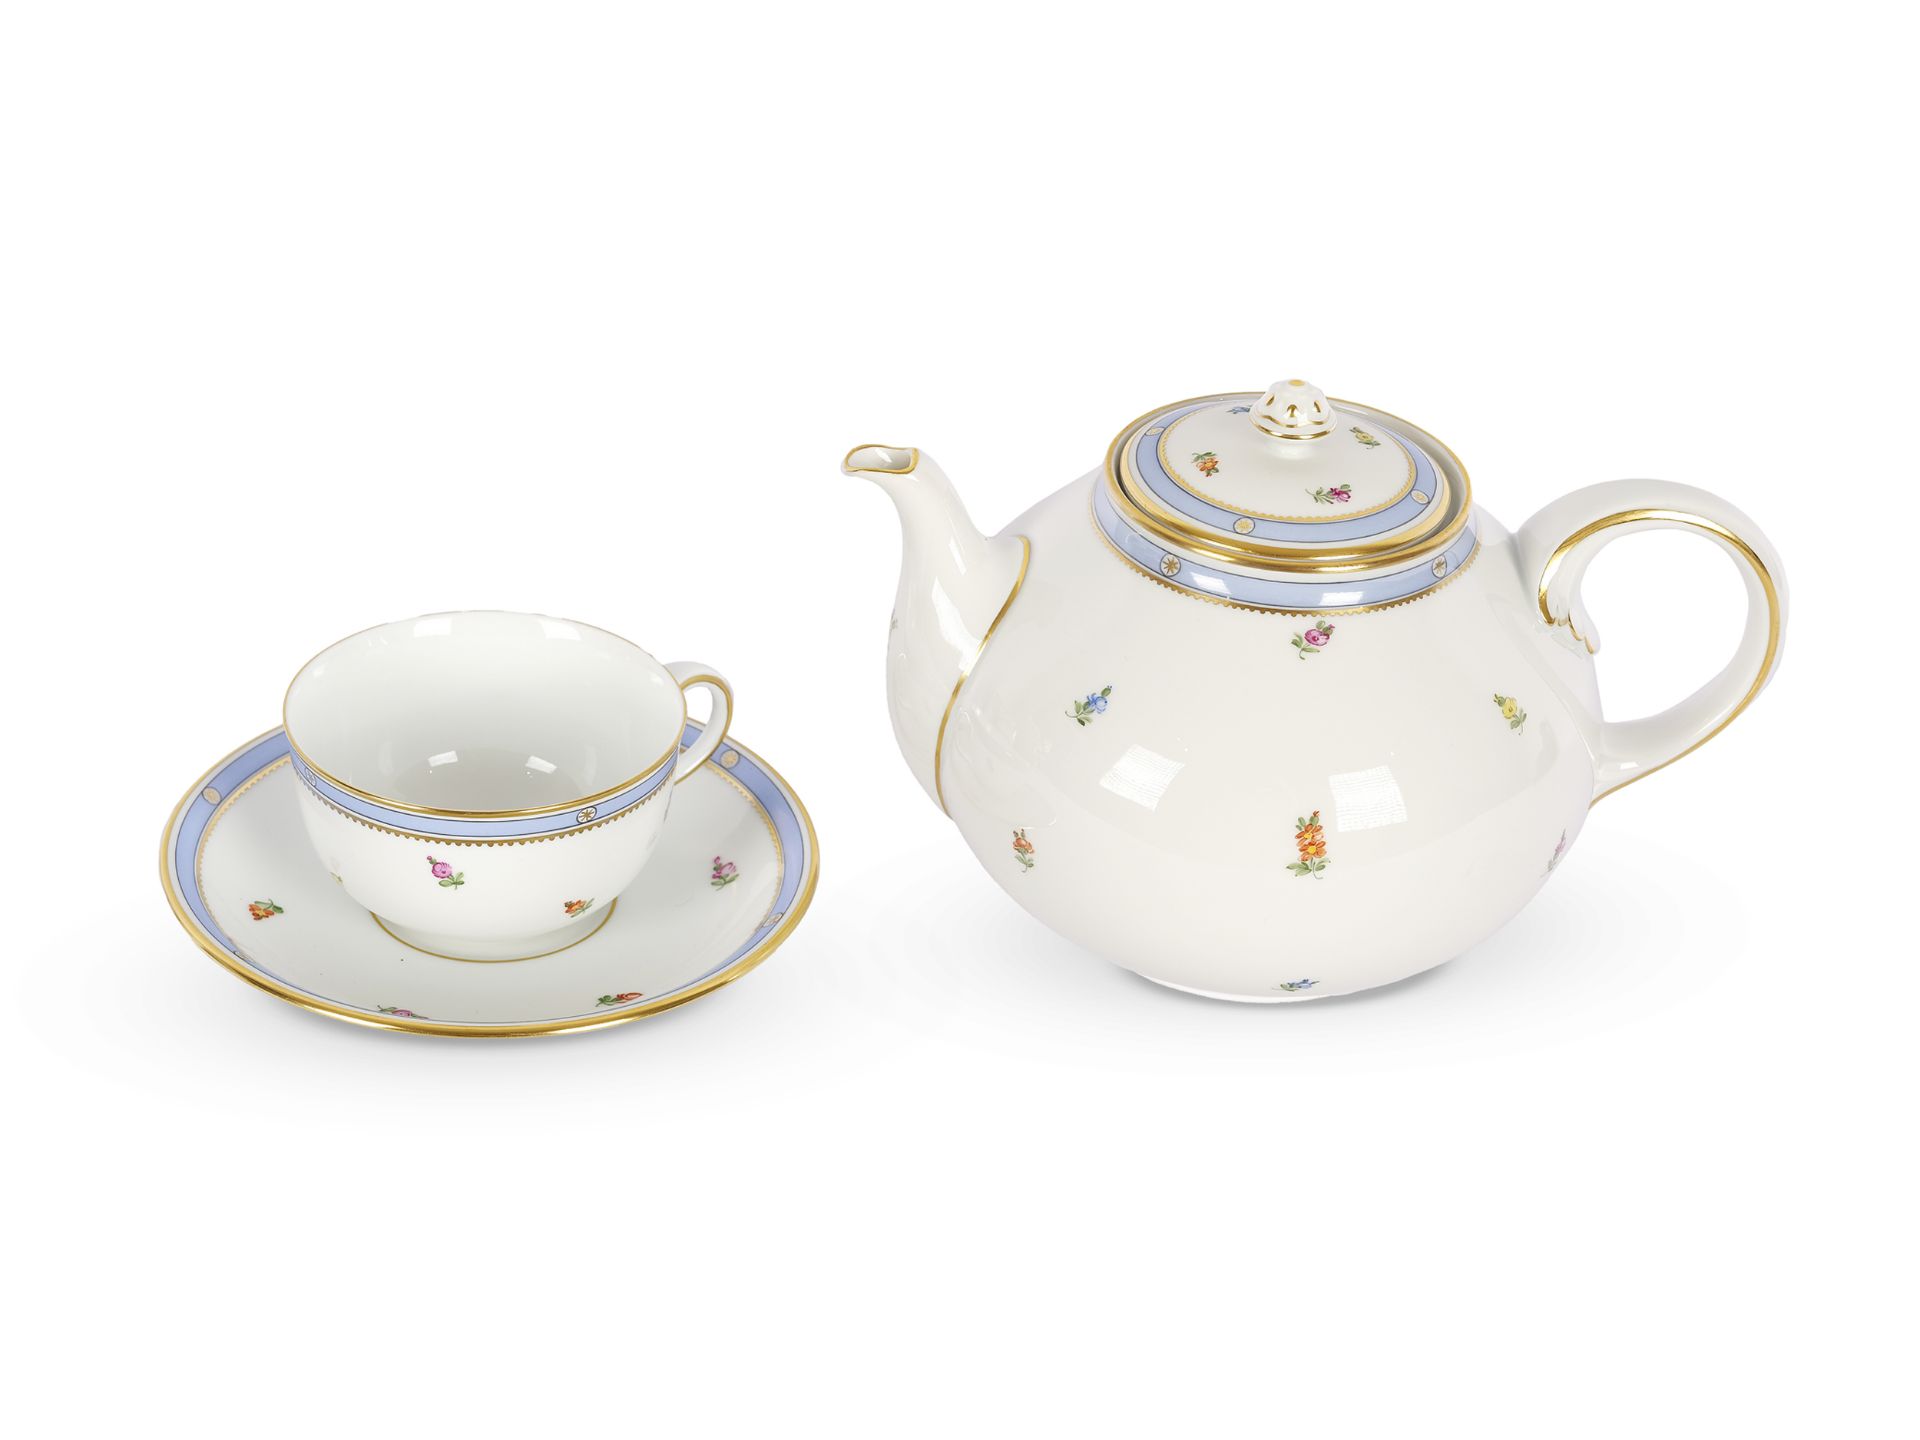 Coffee & tea set with floral decoration, 27 pieces, Augarten Vienna - Image 4 of 6